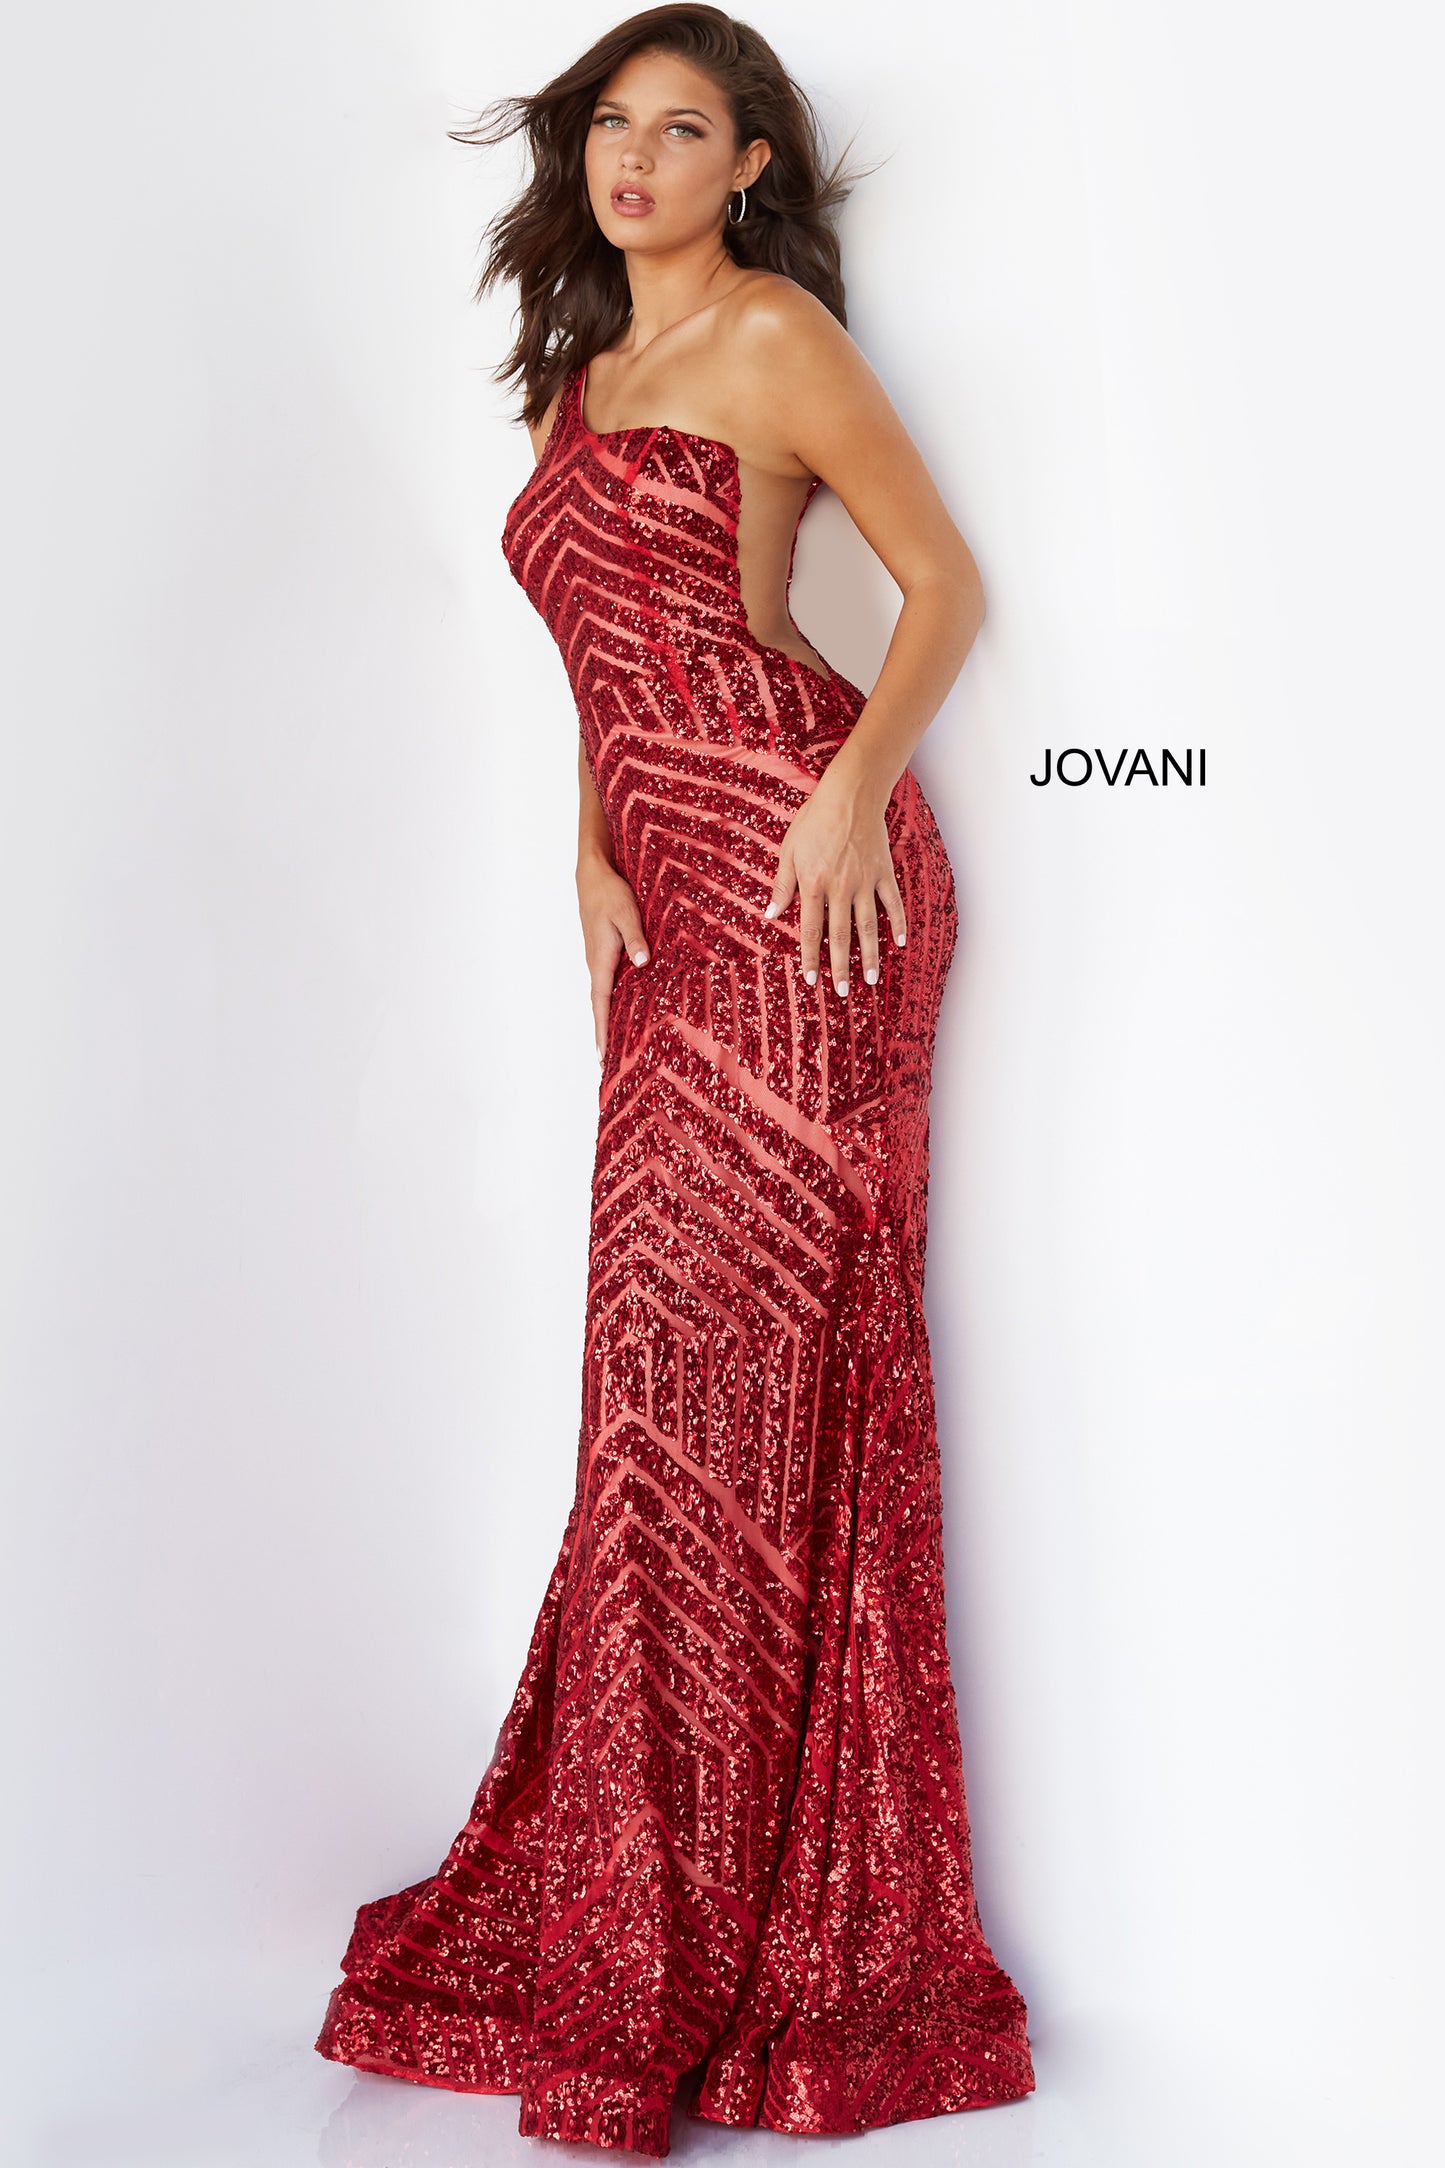 Jovani 06017 Long Mermaid Prom Pageant Gown Sequin One Shoulder Formal Sheer This Jovani 06017 red prom gown features a fit and flare silhouette in geometric sequins, detailed with a one-shoulder neckline and sheer plunging sides. Soft godets add volume to this glitter formal dress, finished with a horsehair hem and sweep train. Available Size-00-24  Available Color- Red, Purple, Blush, Neon Hot Pink